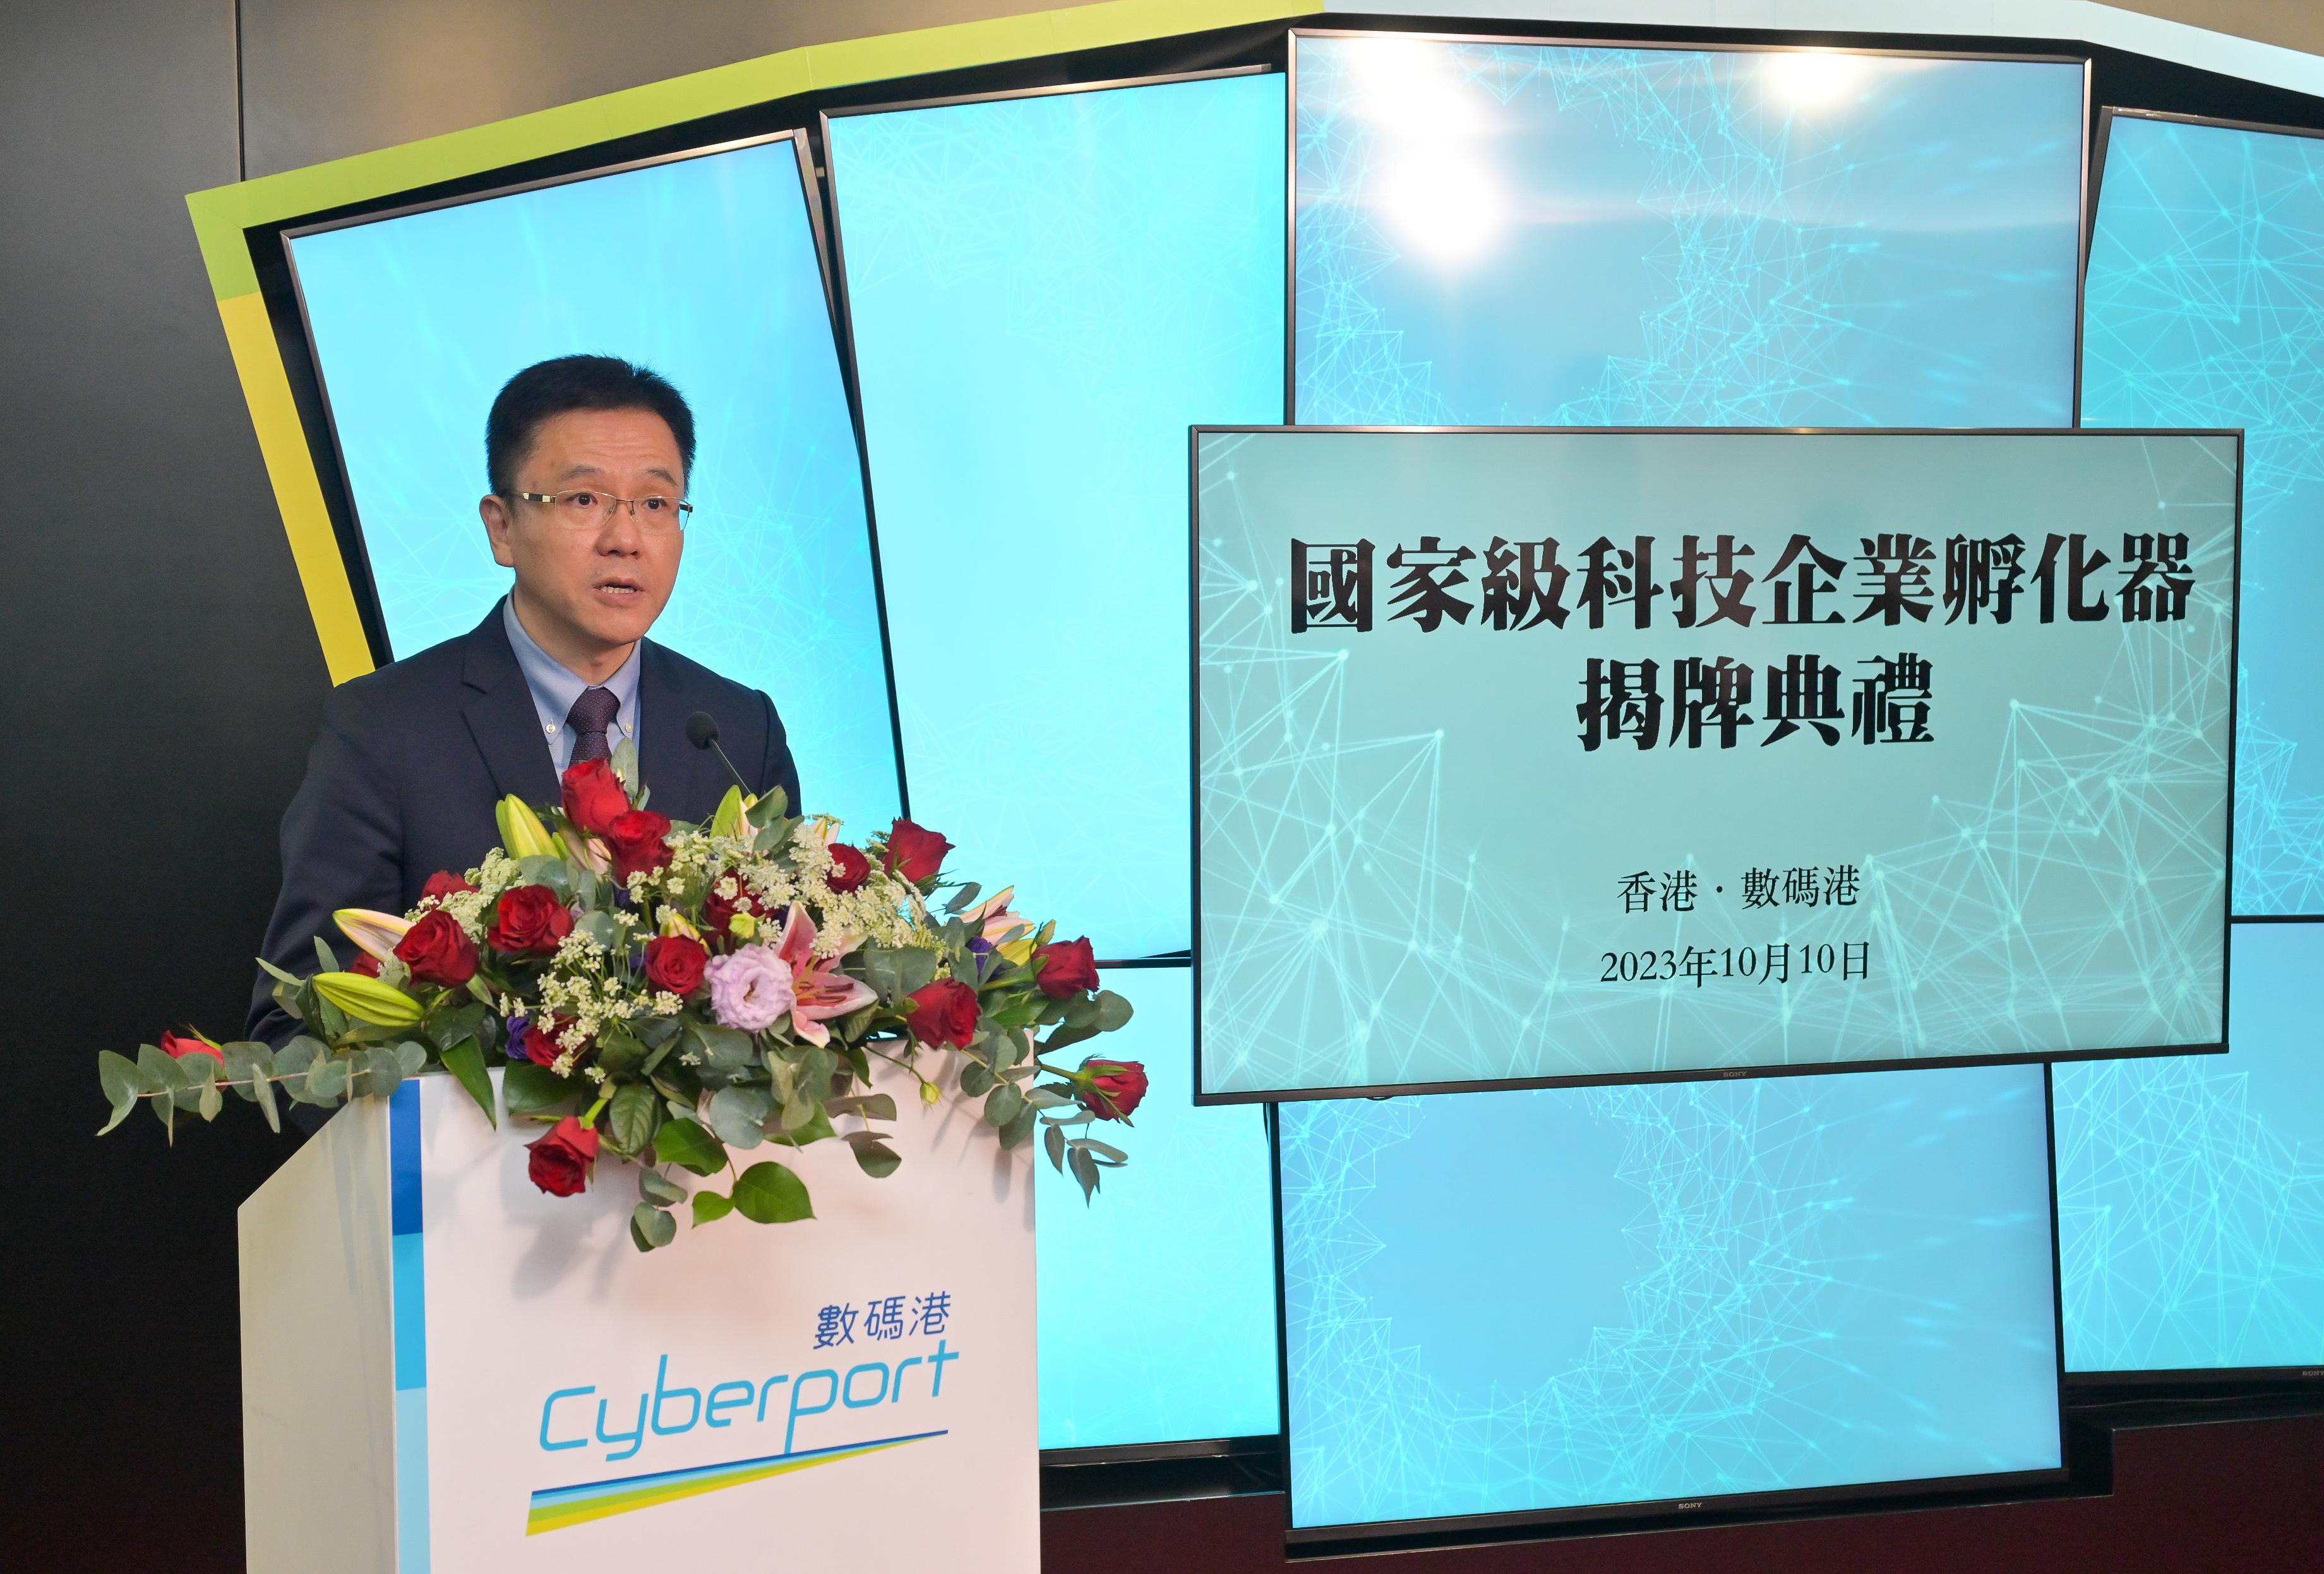 The Secretary for Innovation, Technology and Industry, Professor Sun Dong, speaks at the plaque unveiling ceremony today (October 10) to mark the Hong Kong Cyberport Management Company Limited being formally awarded as a State-level Scientific and Technological Enterprise Incubator by the Ministry of Science and Technology.